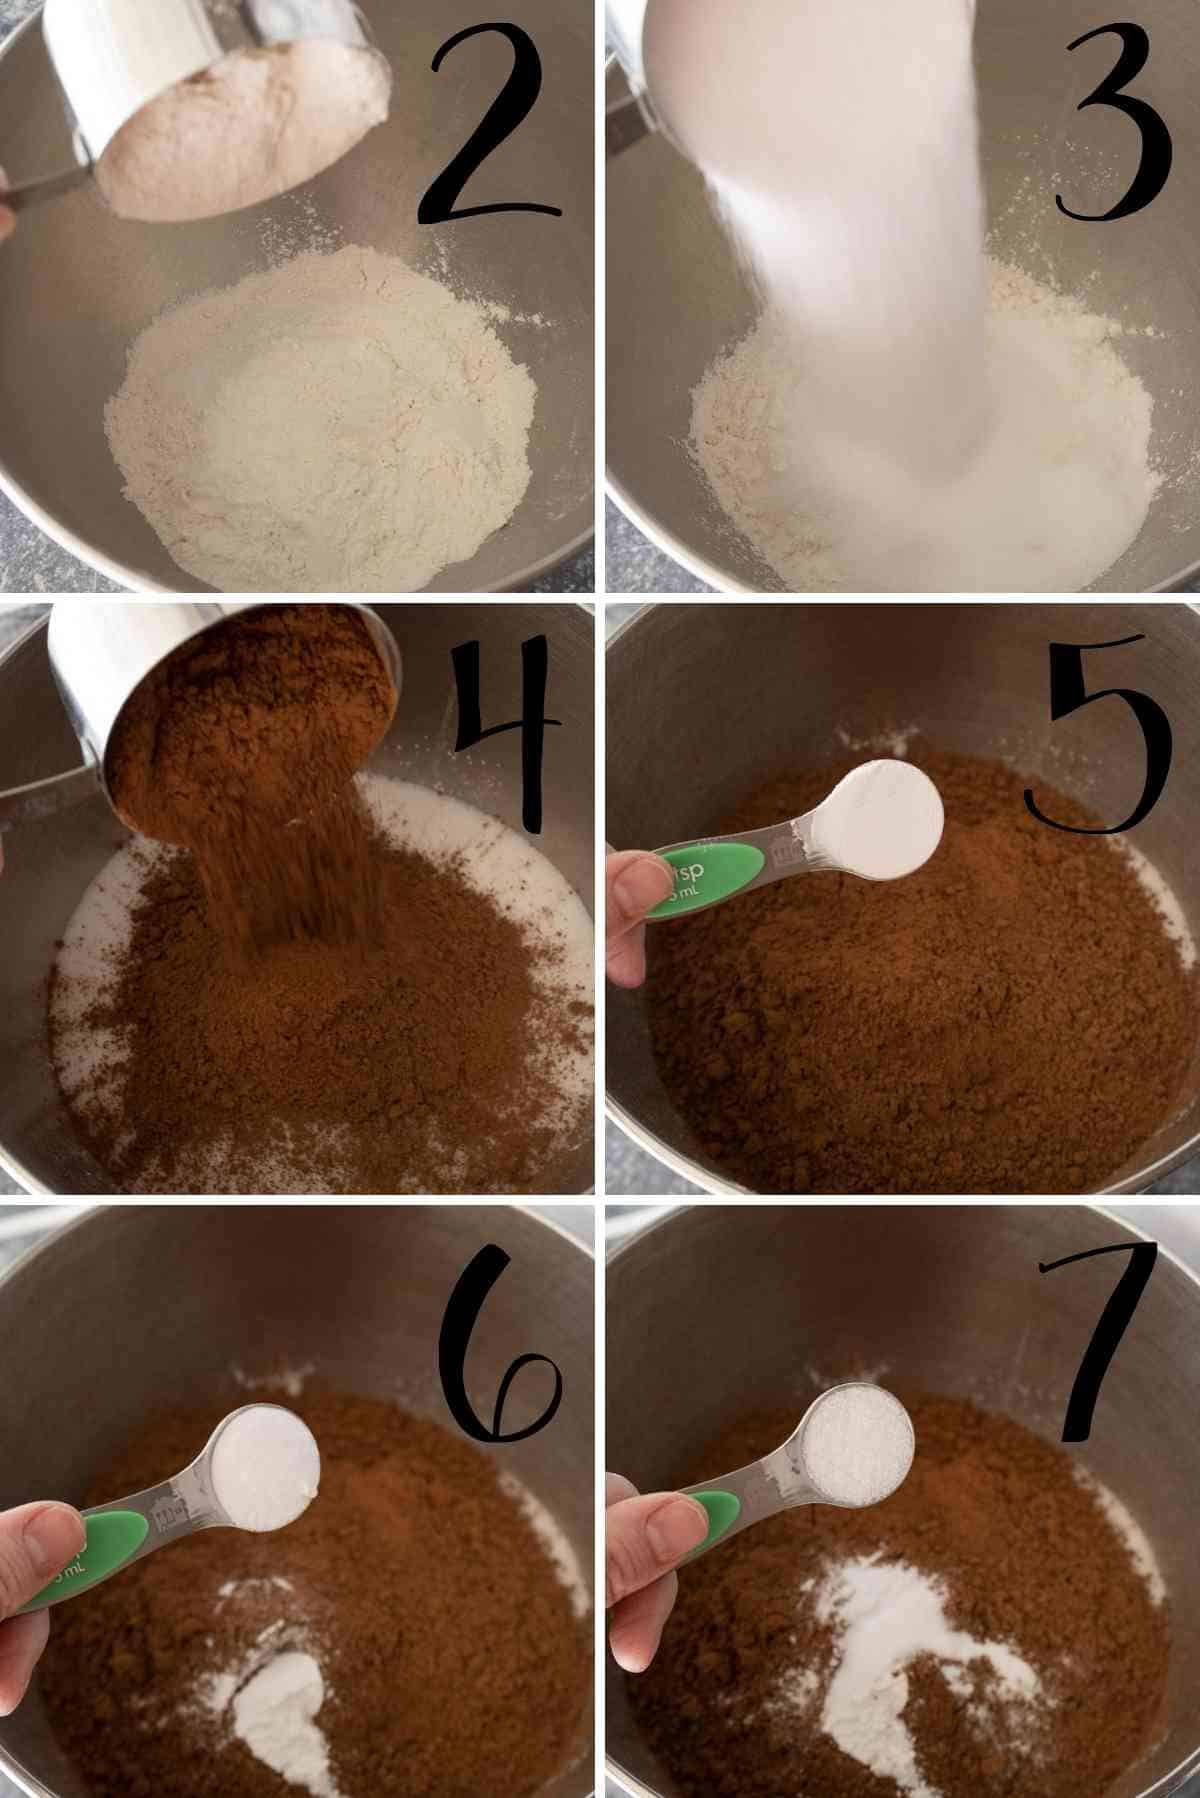 Dry ingredients added to a mixing bowl.